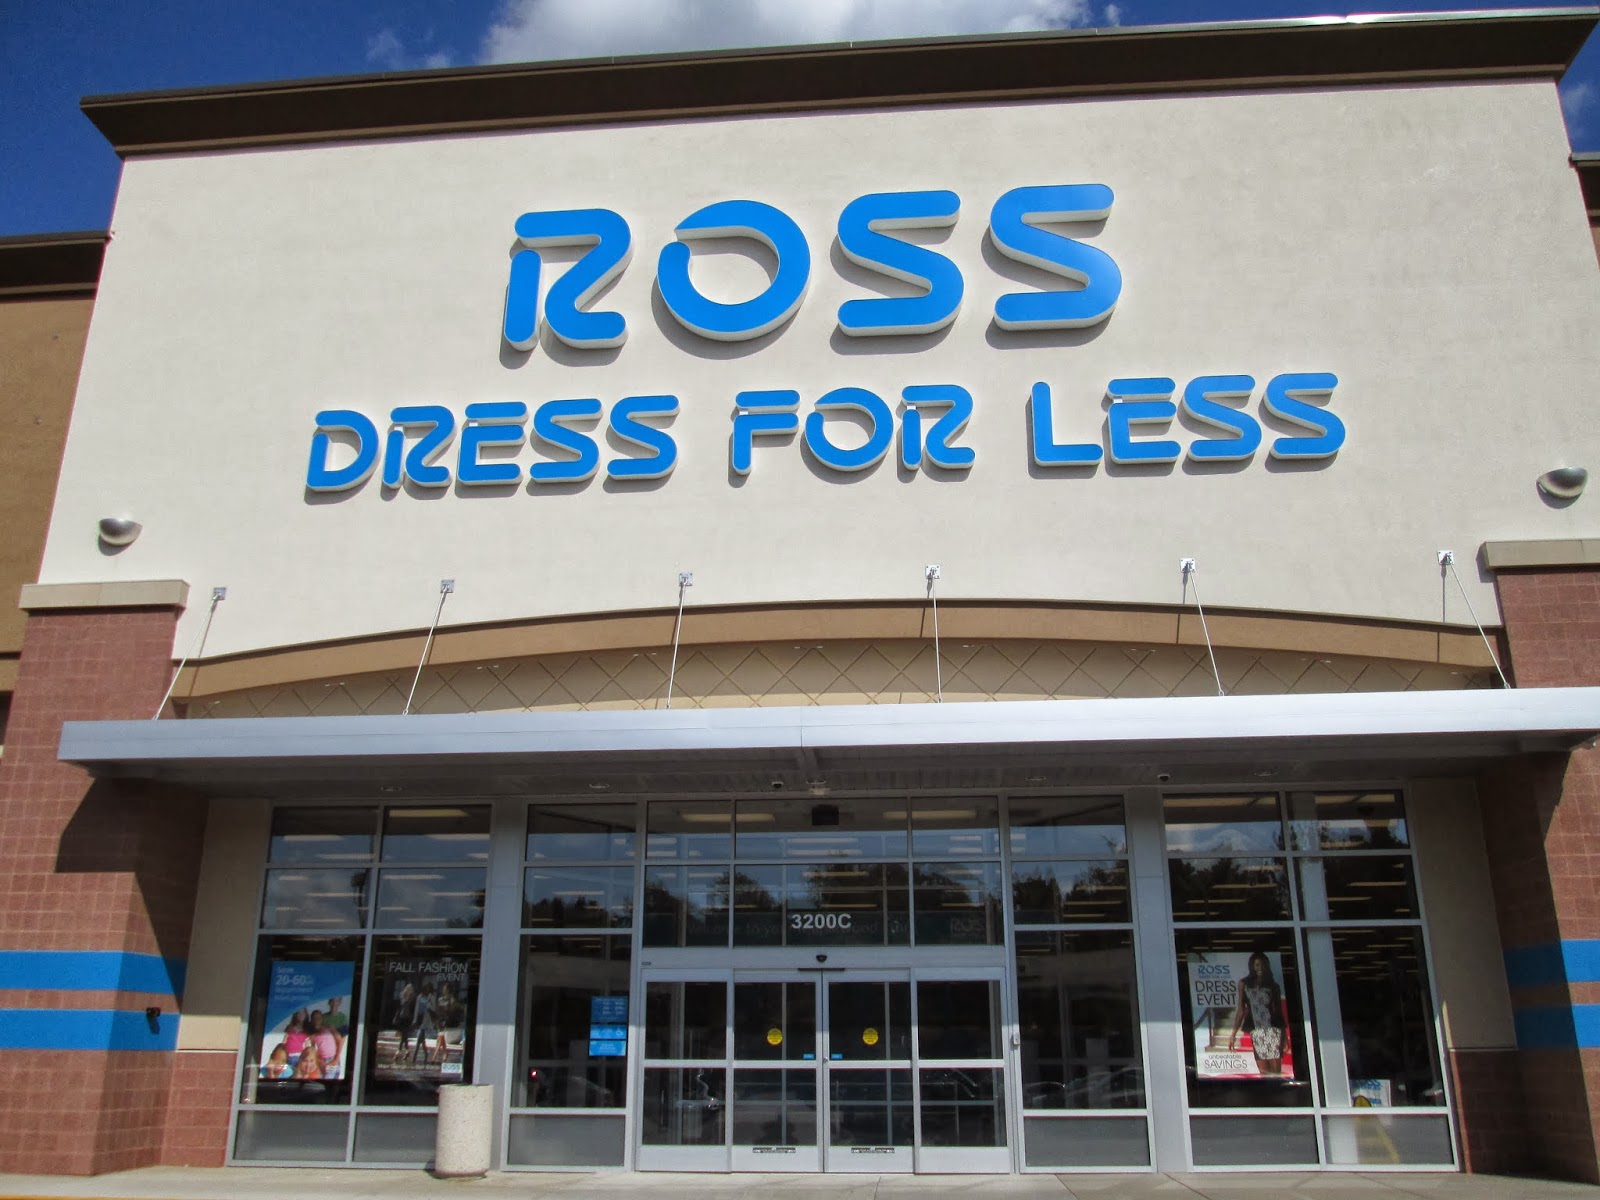 Moda Christia Your Chance to dress fab for less with Ross Dress for Less